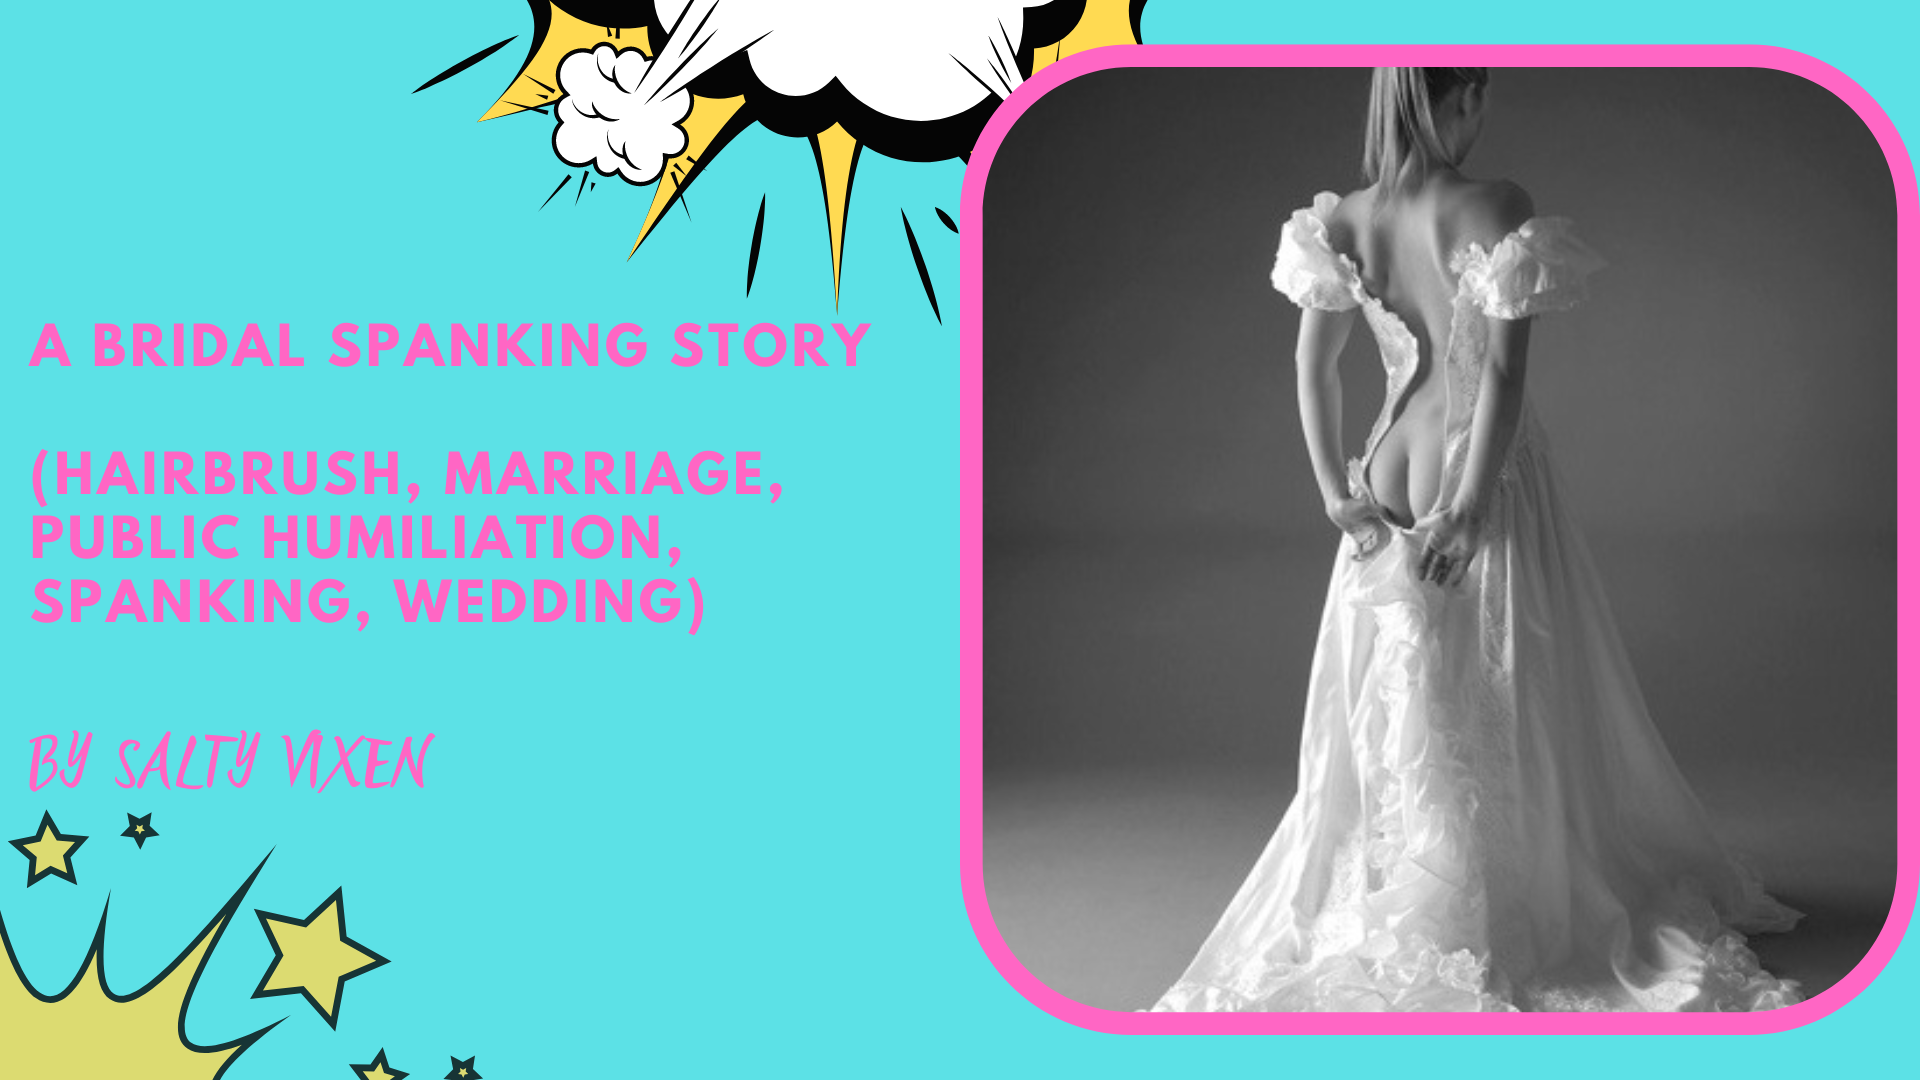 A Bridal Spanking Story (hairbrush, public humiliation, spanking) ~ Salty Vixen Stories and More image